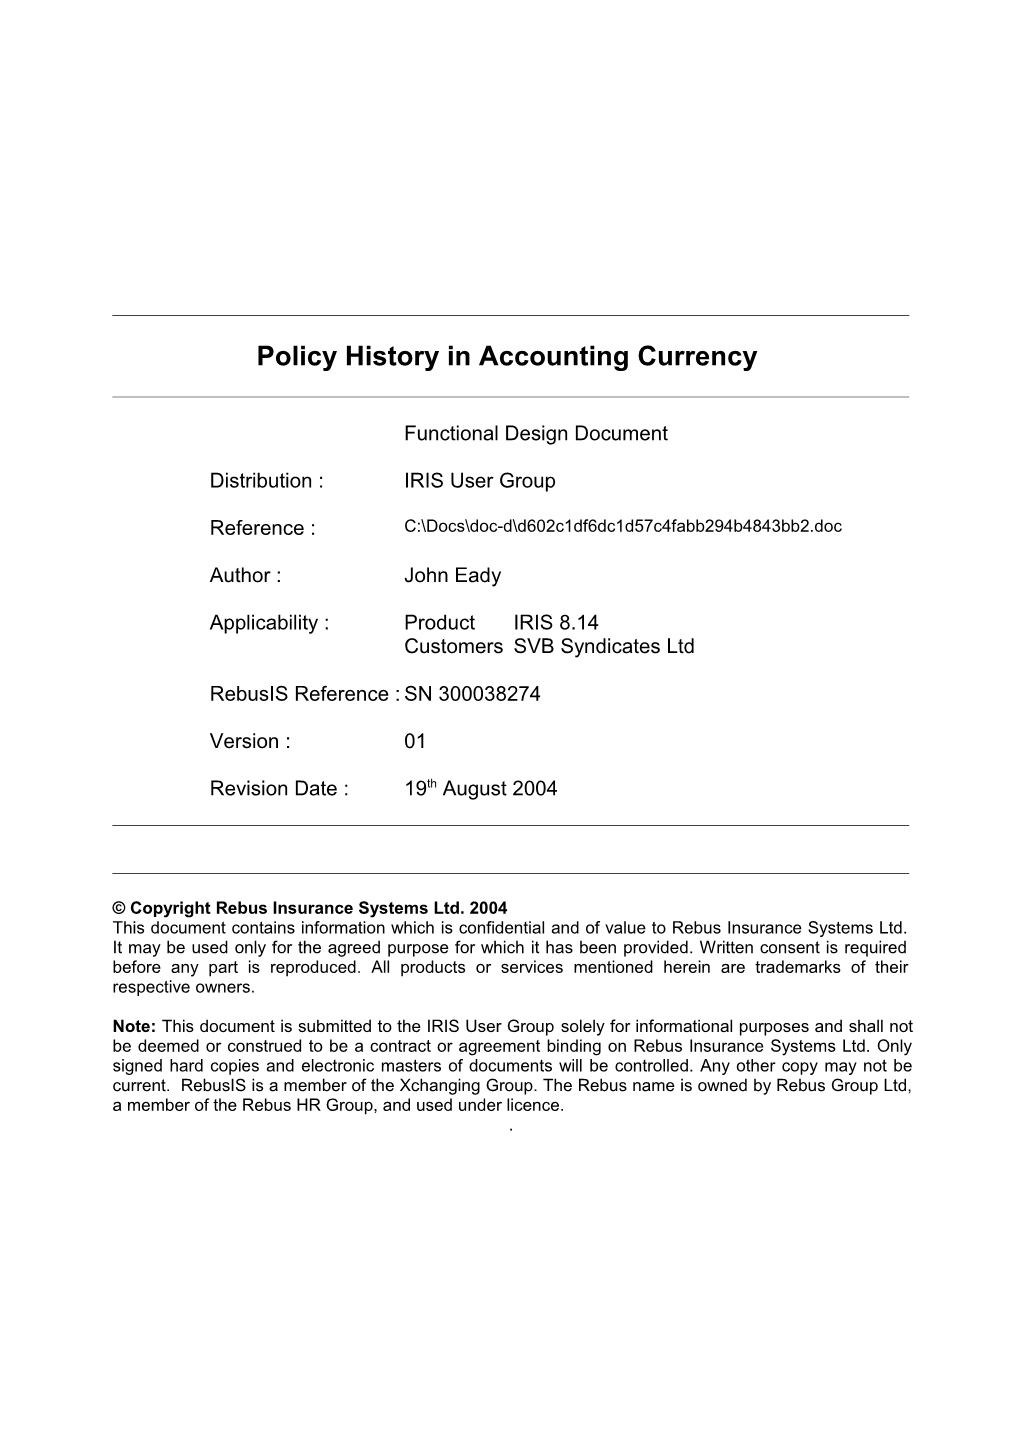 Policy History in Accounting Currency